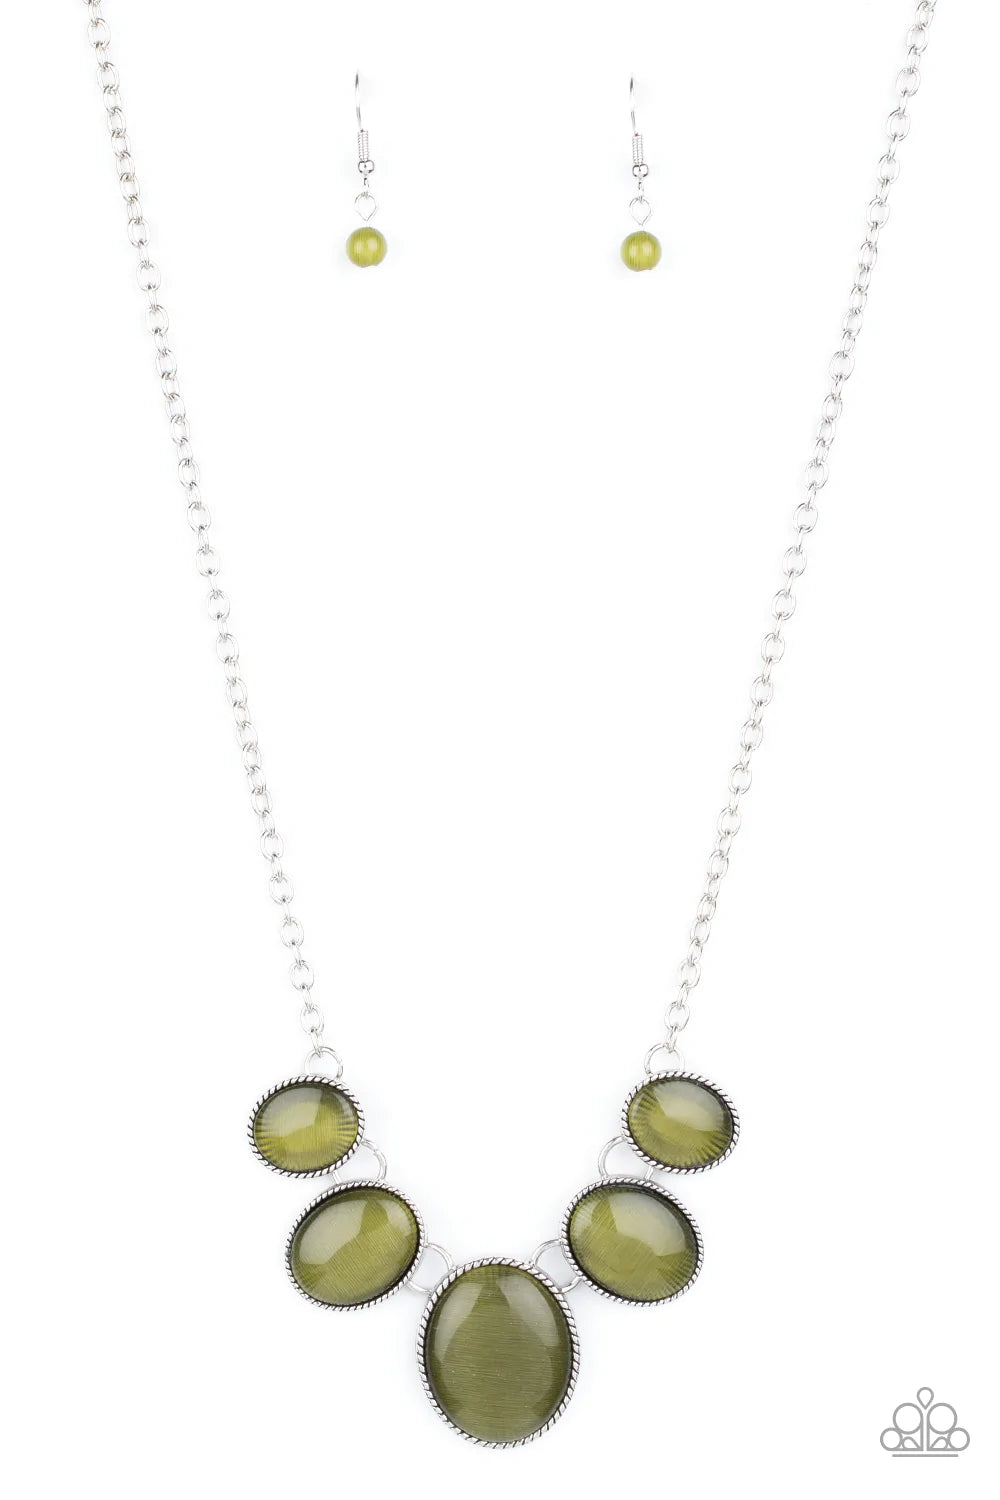 Paparazzi Necklace ~ One Can Only GLEAM - Green